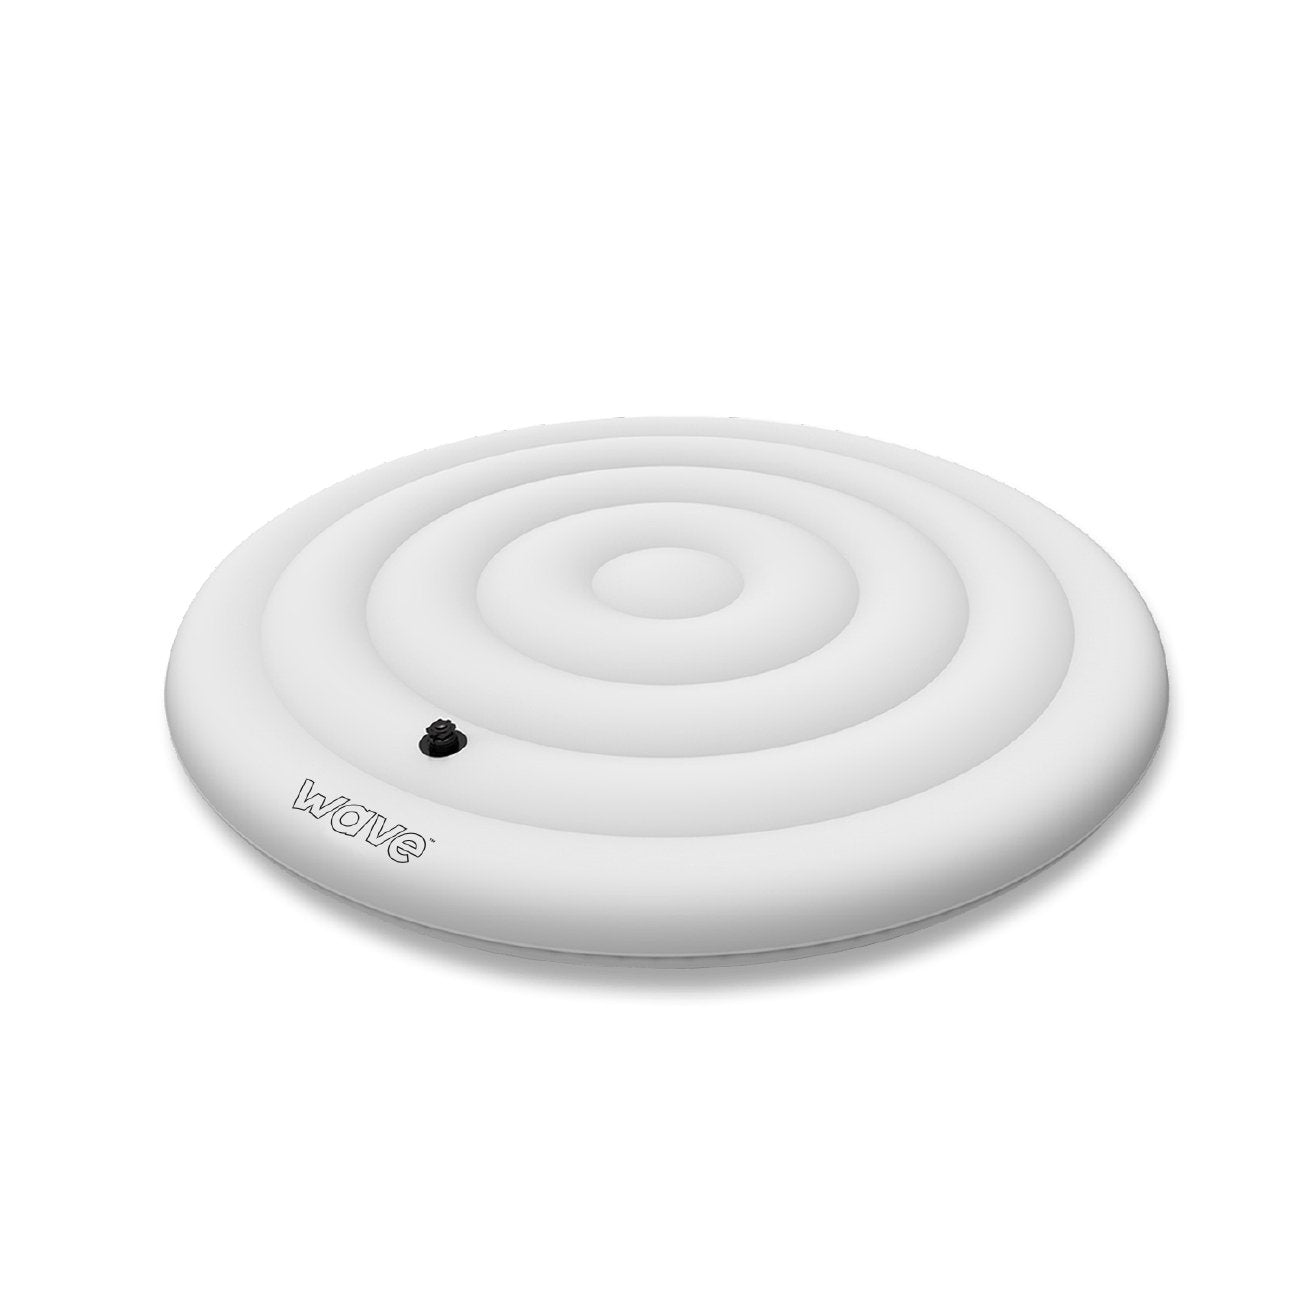 Wave Spa Round 4 Person Protective Thermal Efficient Inflatable Cover, White - Wave Spas Inflatable, foam Hot Tubs